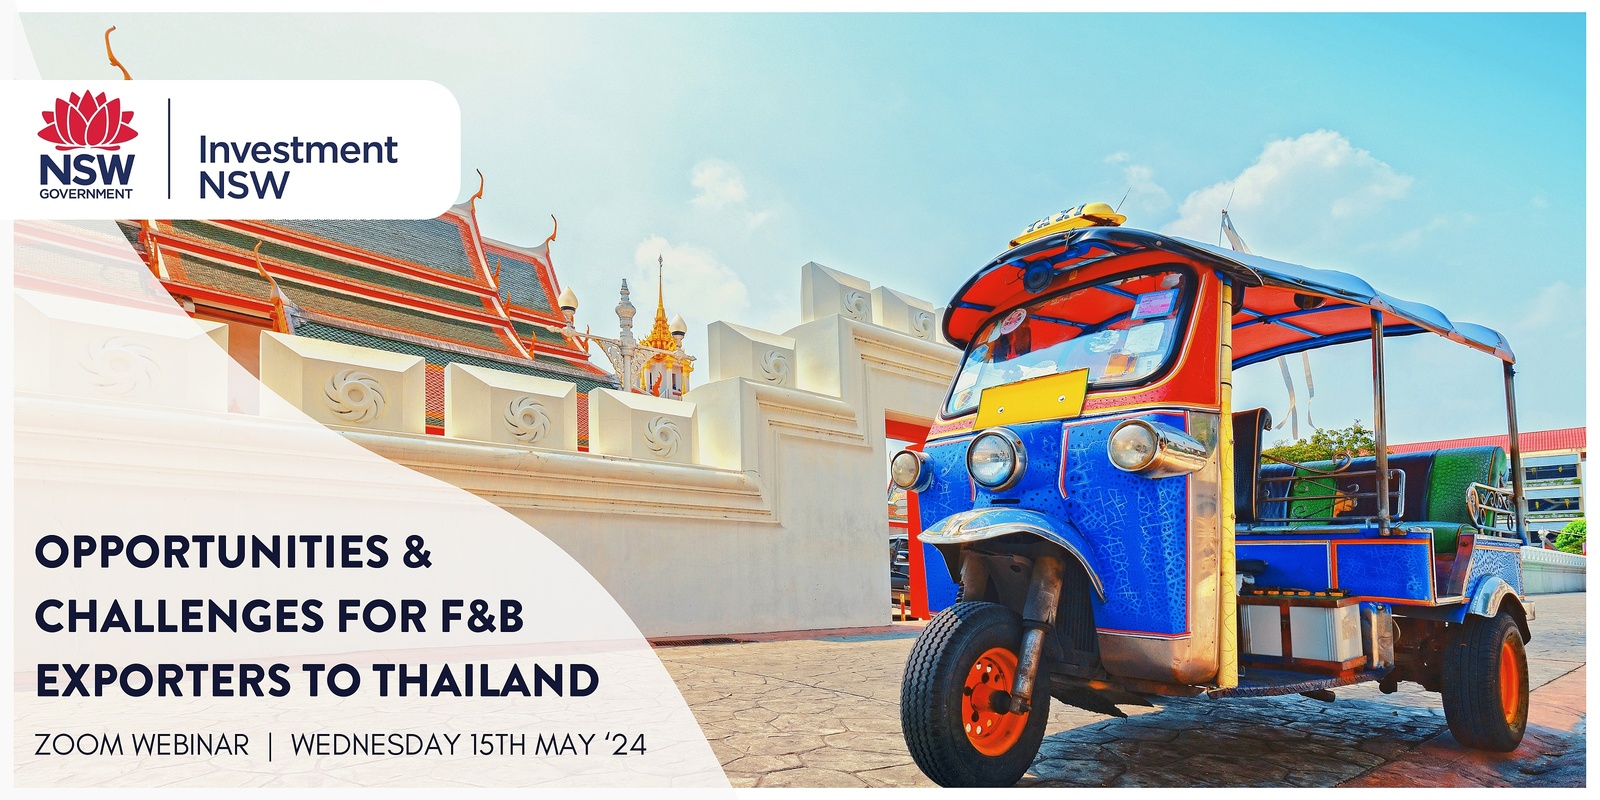 Banner image for Opportunities & Challenges for F&B Exporters to Thailand Webinar